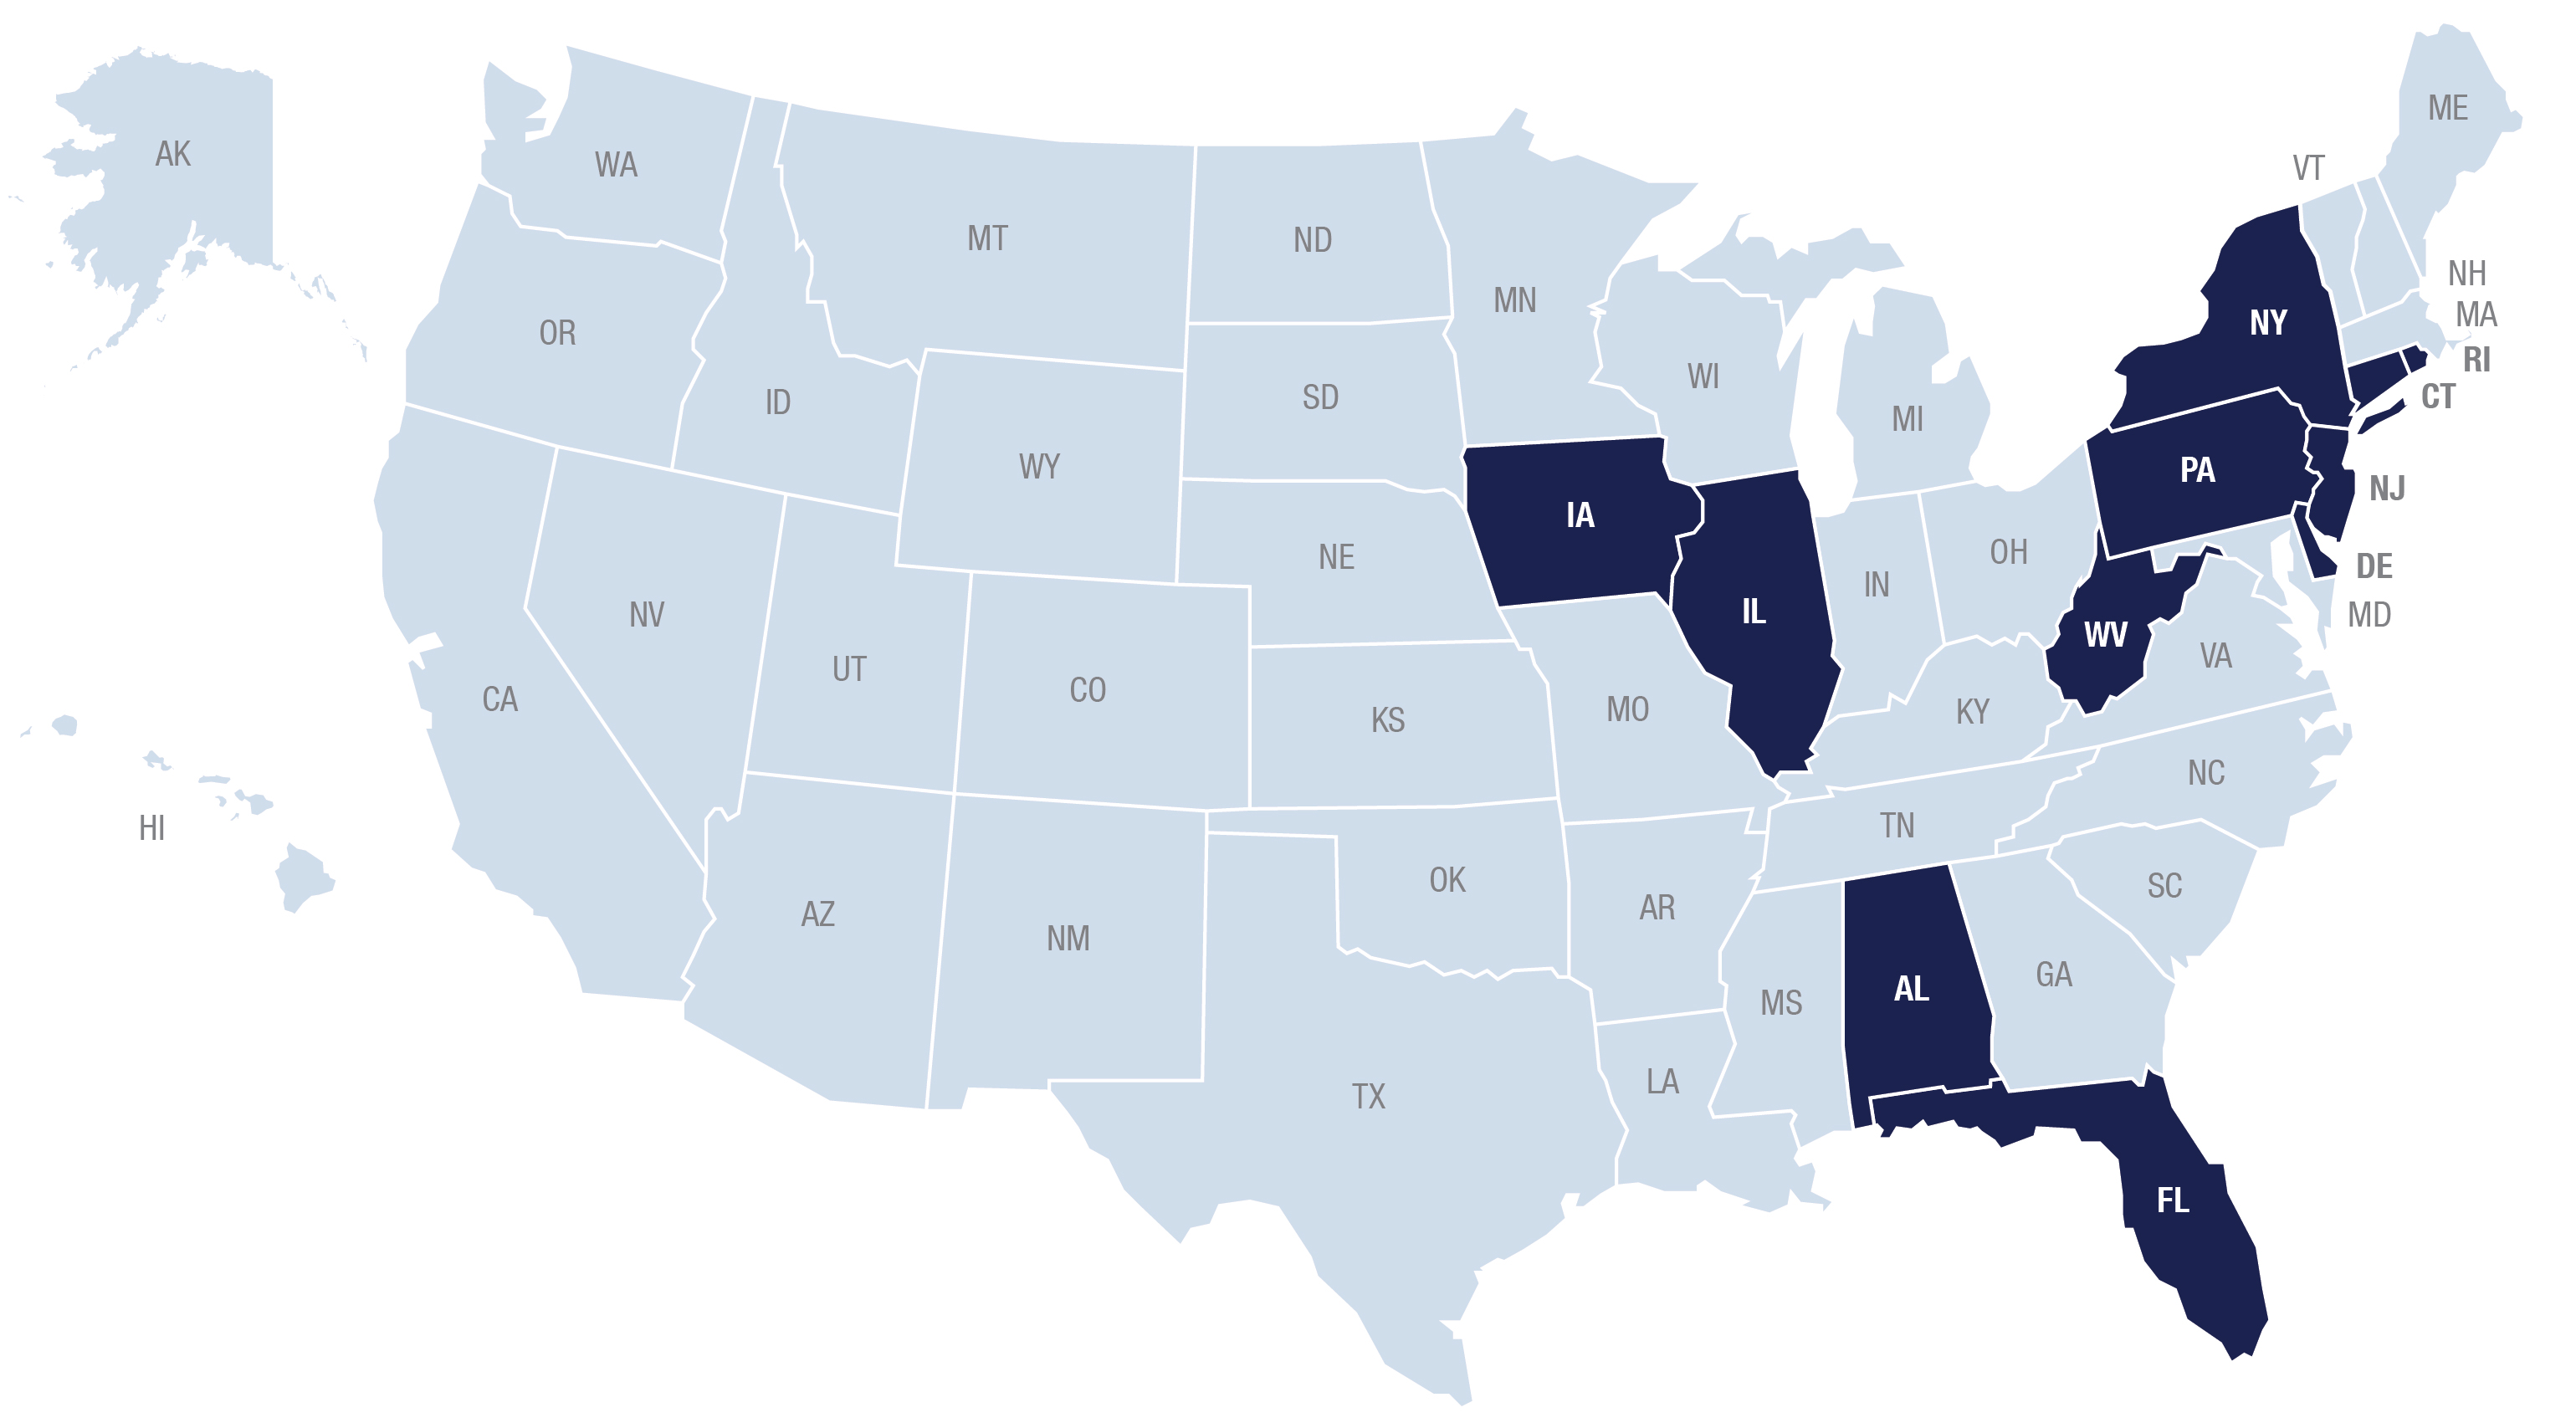 US Map. These 11 states have completed UHPC P&R projects: New York, Pennsylvania, West Virginia, New Jersey, Delaware, Rhode Island, Connecticut, Iowa, Illinois, Alabama, Florida.